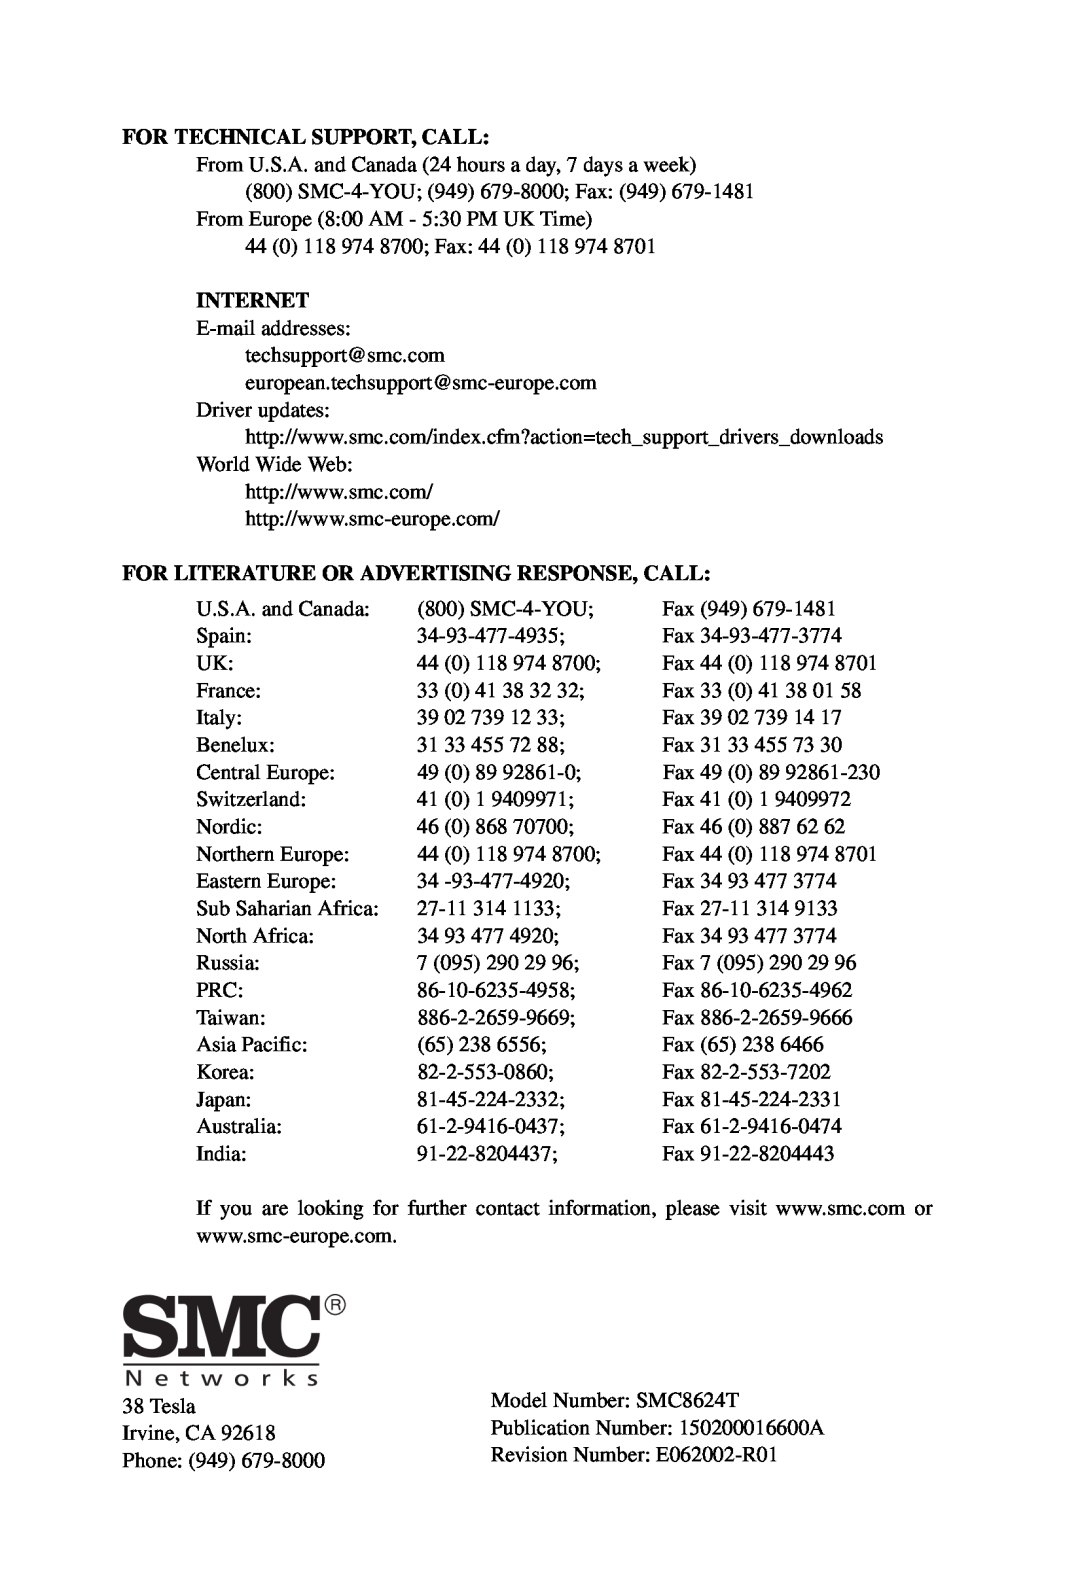 SMC Networks SMC8624T manual For Technical Support, Call, Internet, For Literature Or Advertising Response, Call 